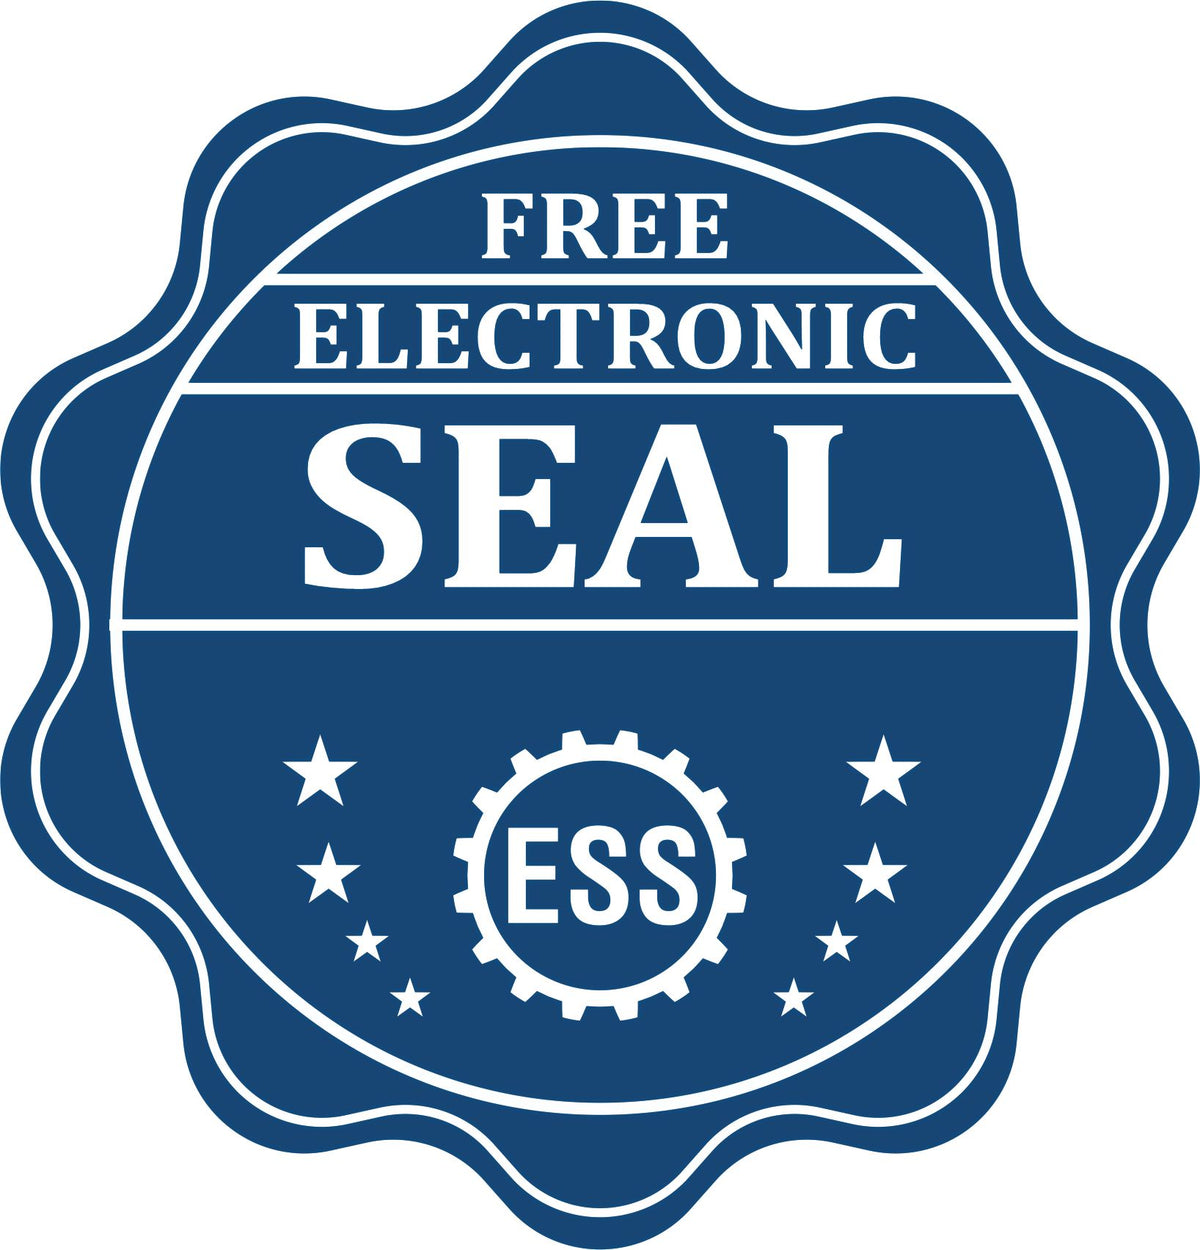 A badge showing a free electronic seal for the Slim Pre-Inked South Carolina Landscape Architect Seal Stamp with stars and the ESS gear on the emblem.